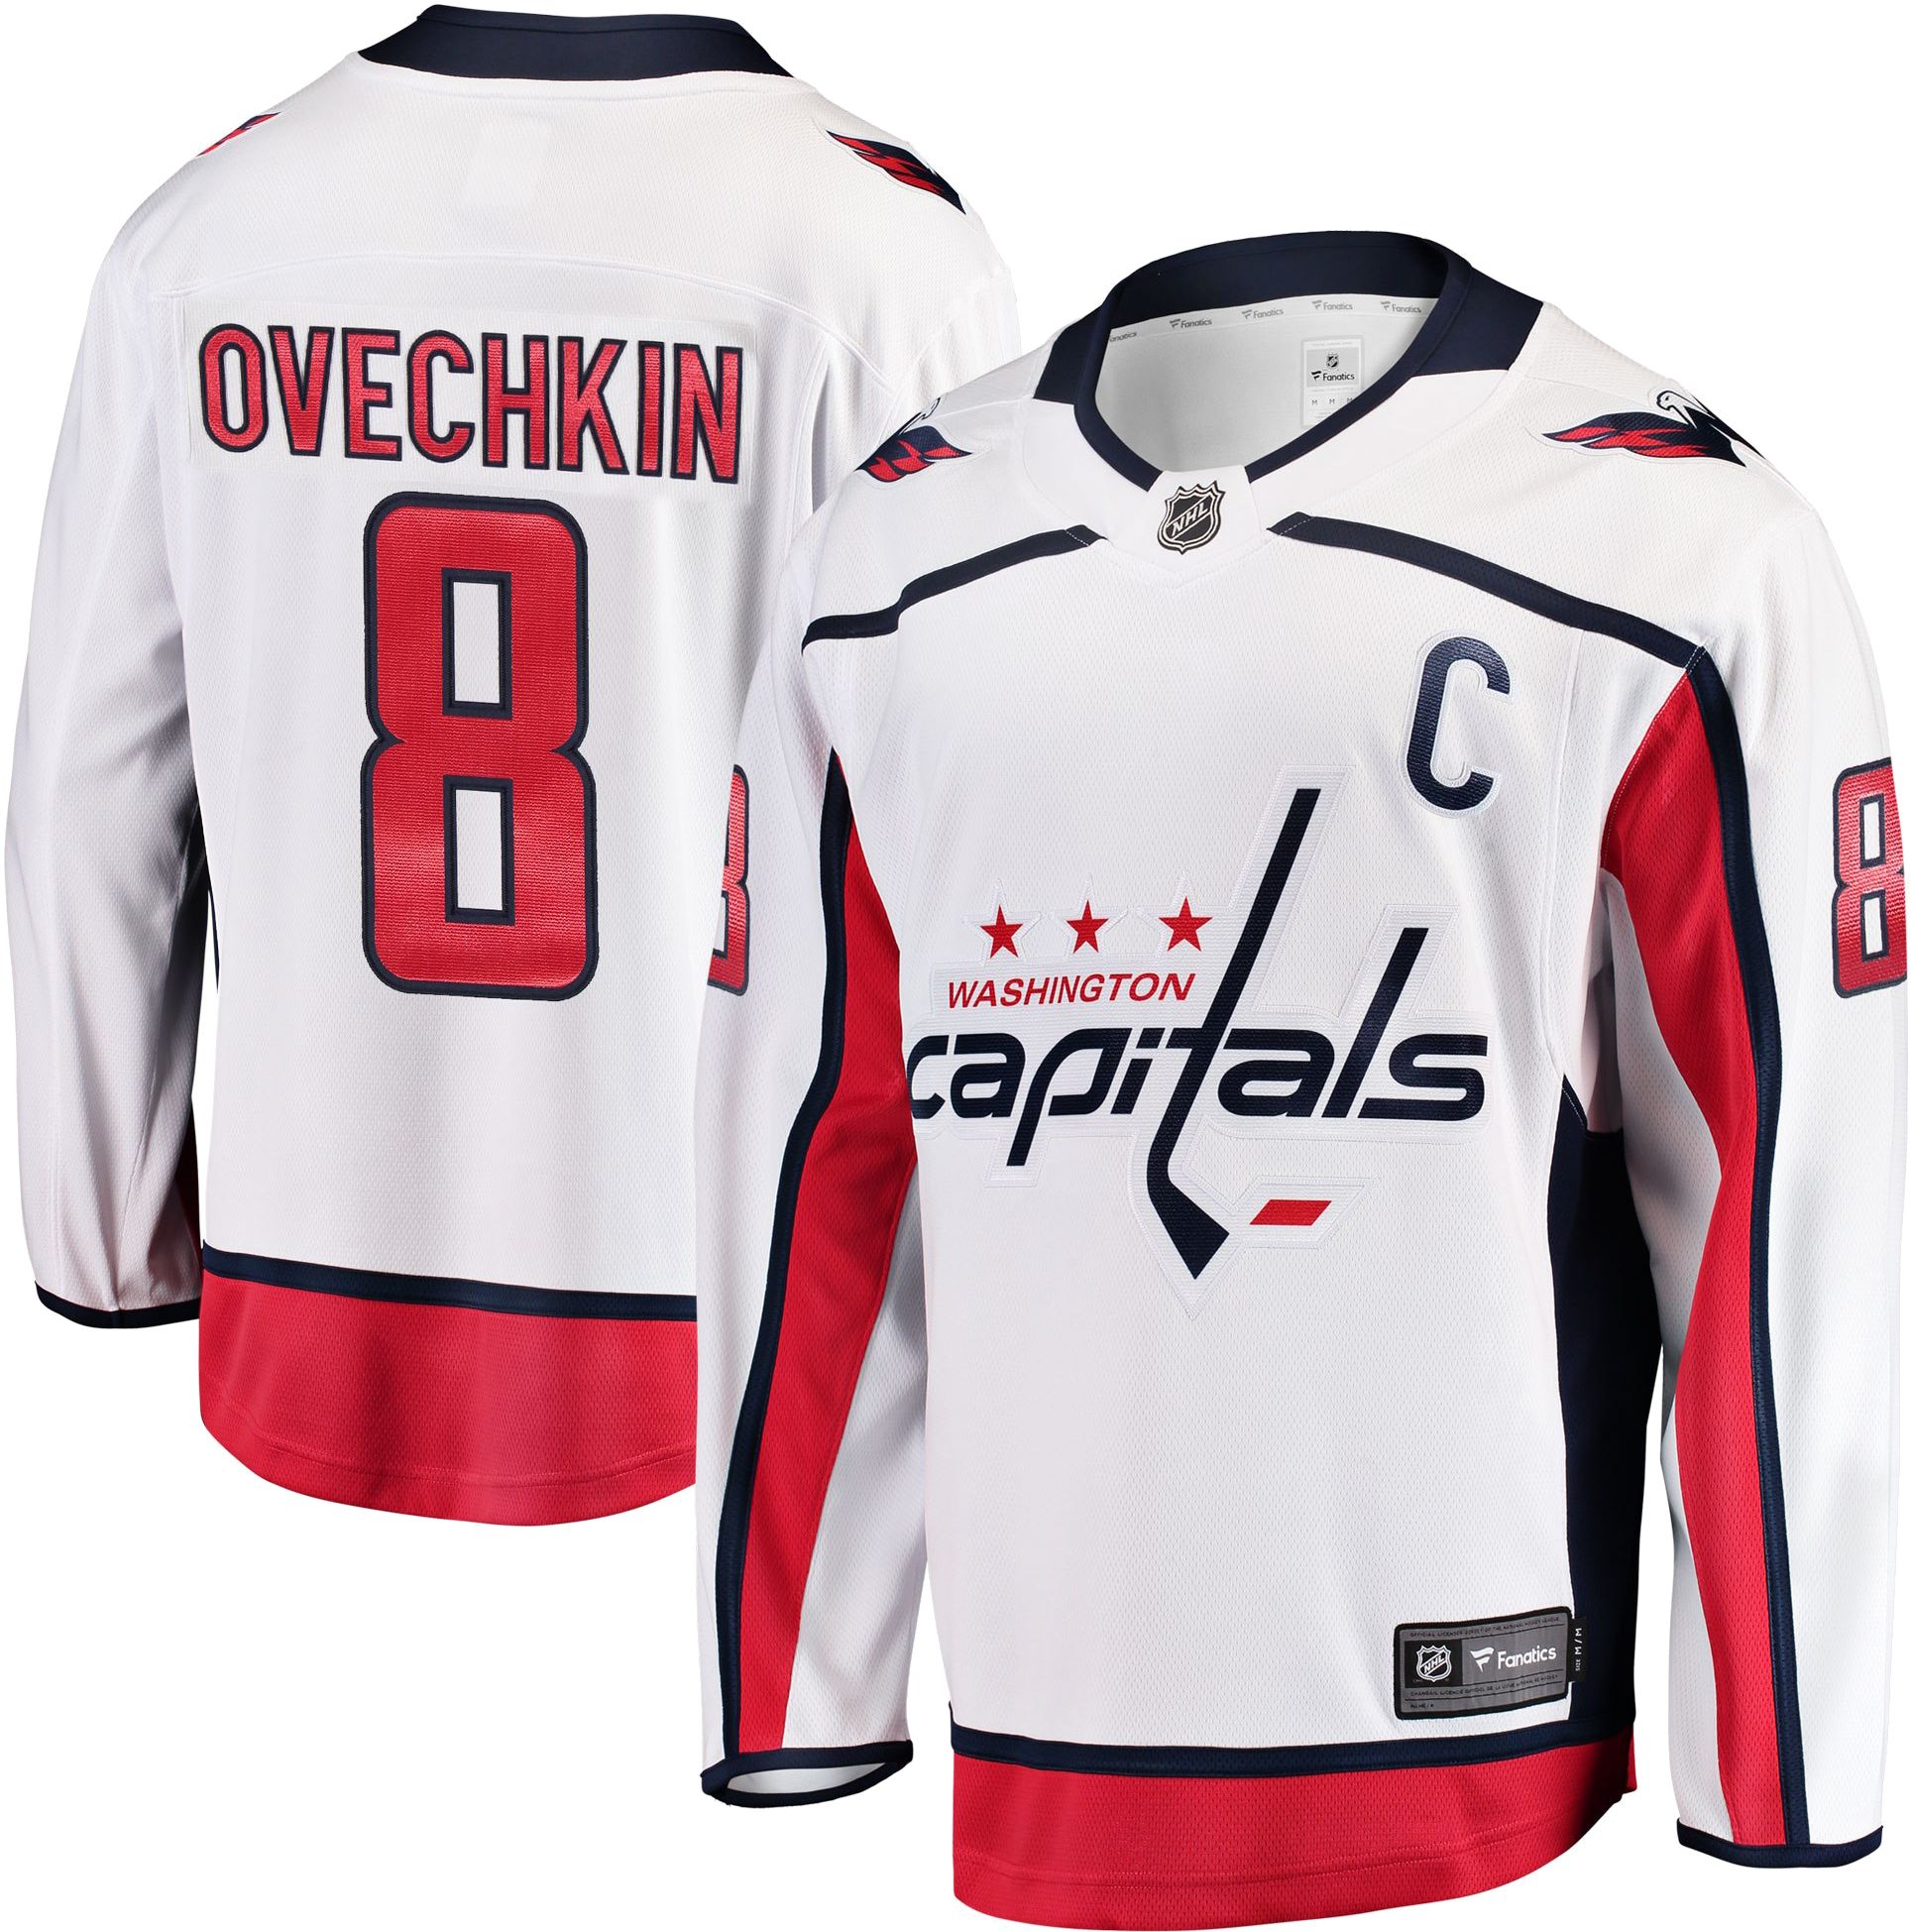 capitals ovechkin jersey